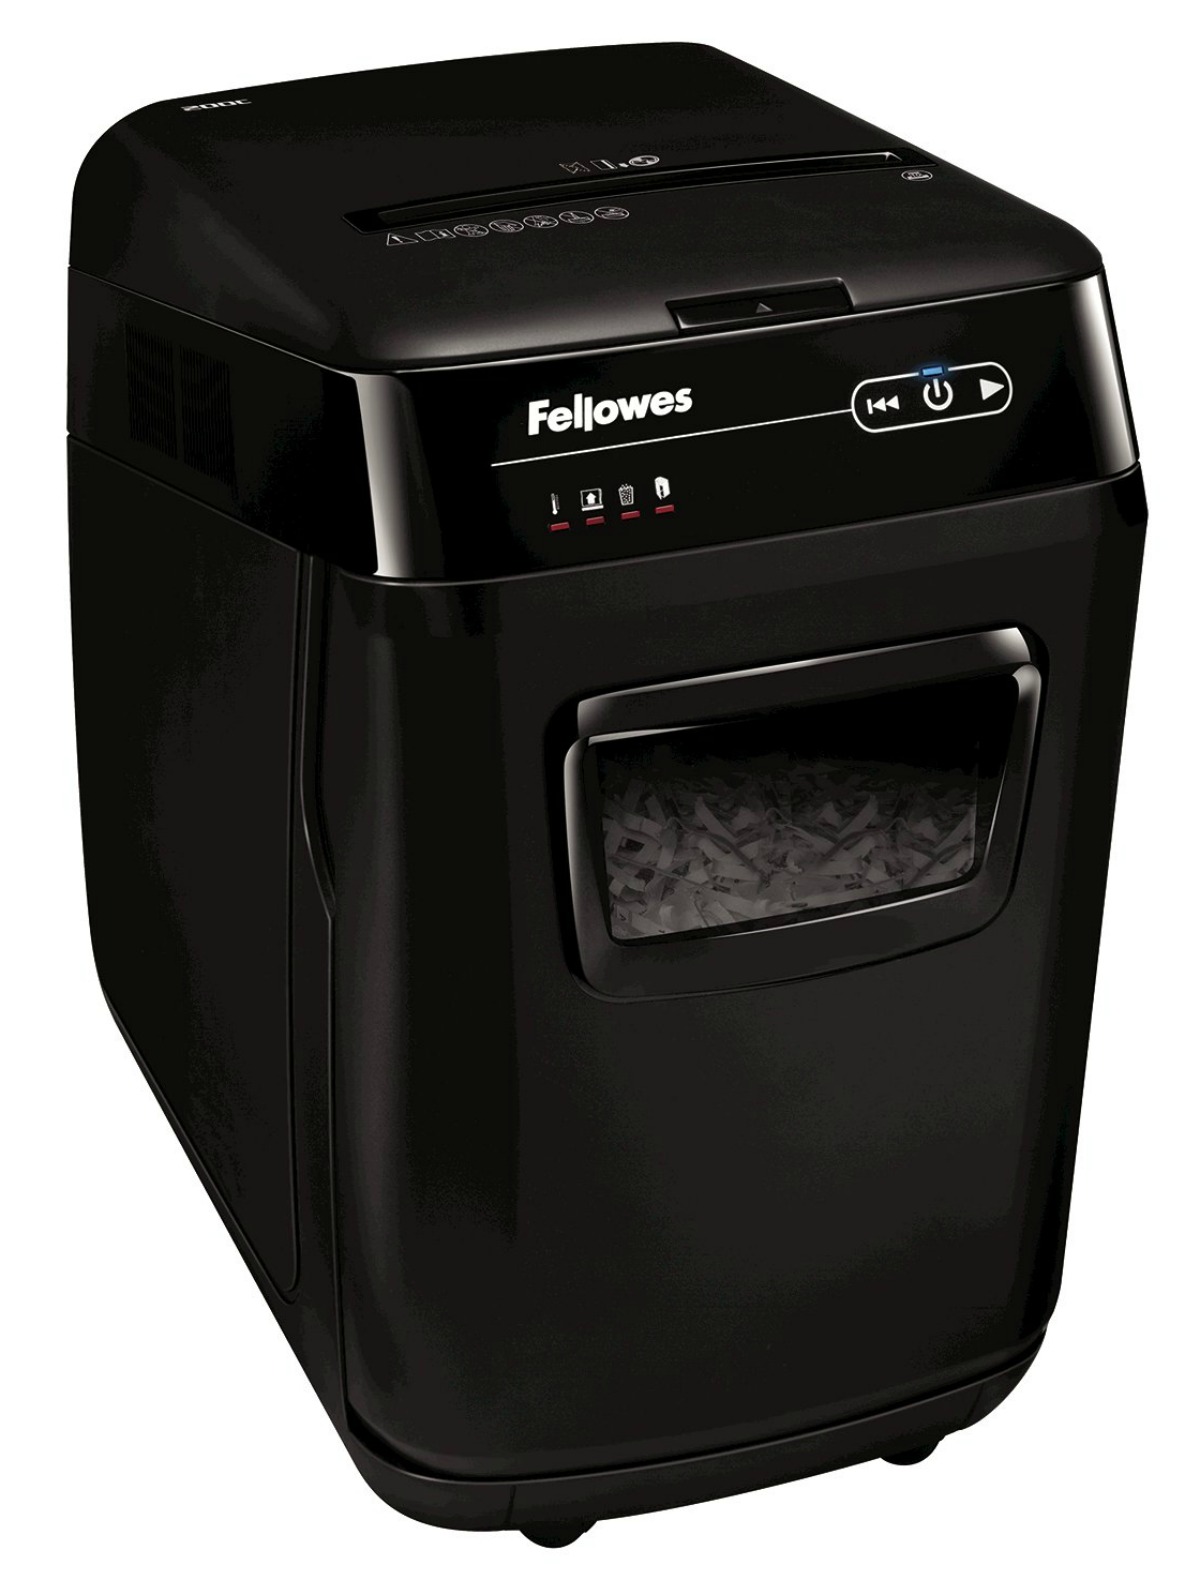 Prevent identity theft by shredder documents with personal information with a Fellowes Shredder